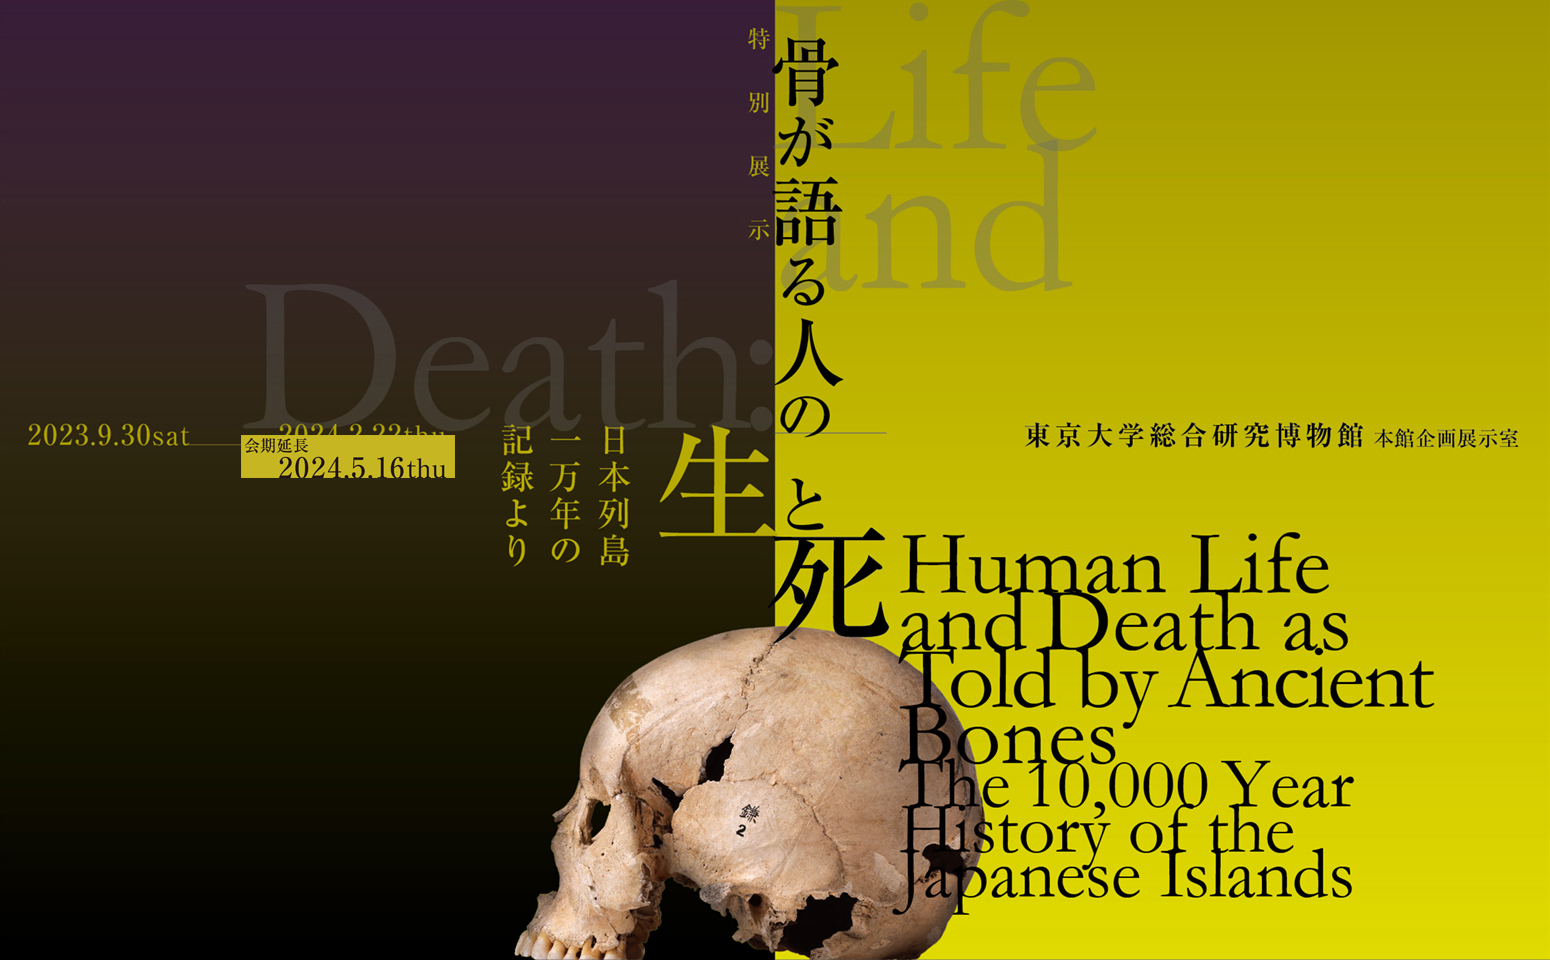 Human Life and Death as Told by Ancient Bones : The 10,000 Year History of the Japanese Islands